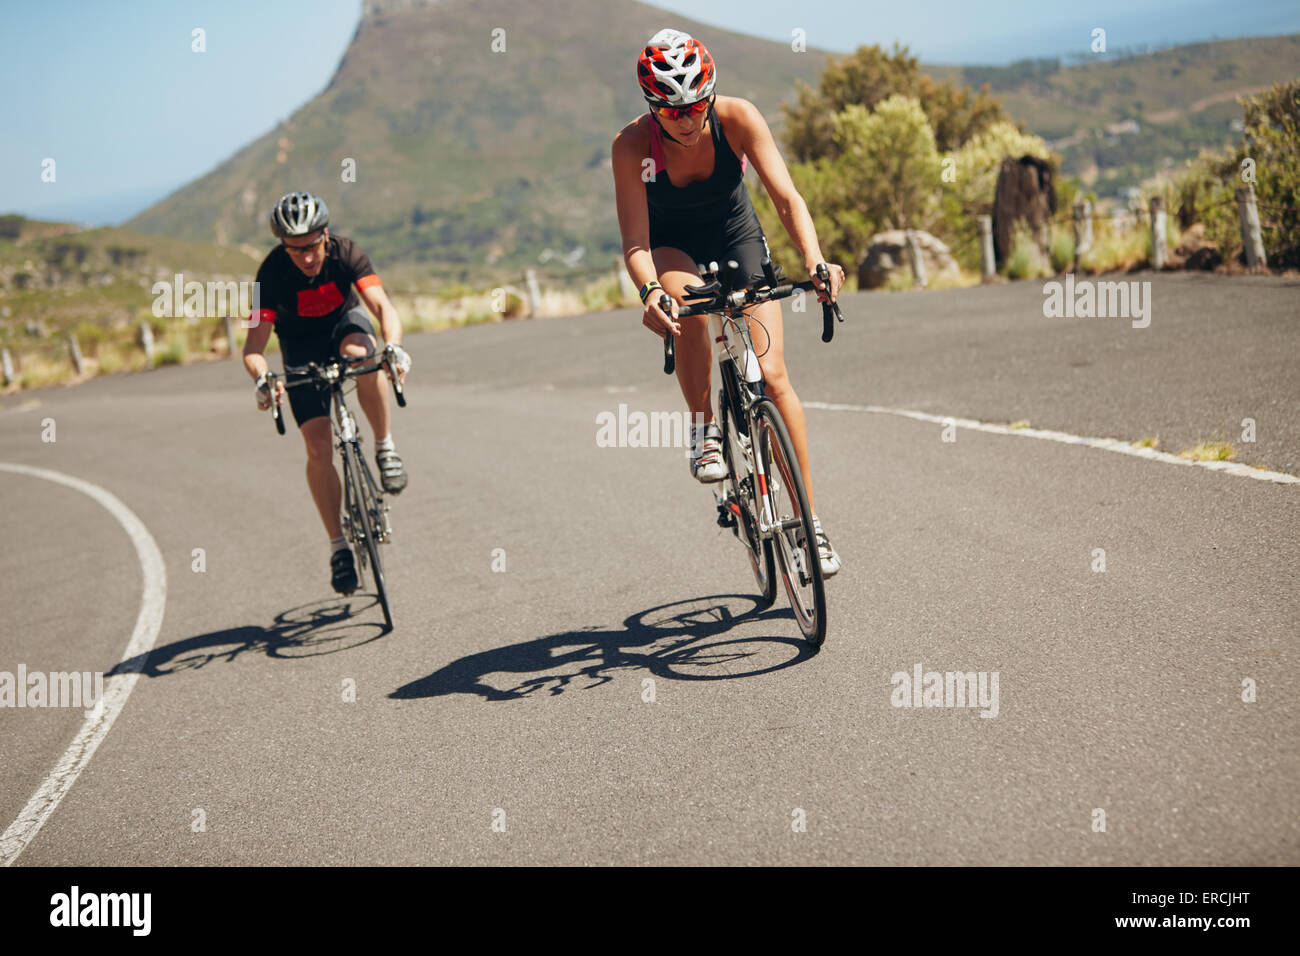 Cyclist riding bikes on open road. Triathletes cycling down the hill on bicycles. Practicing for triathlon race on country road. Stock Photo